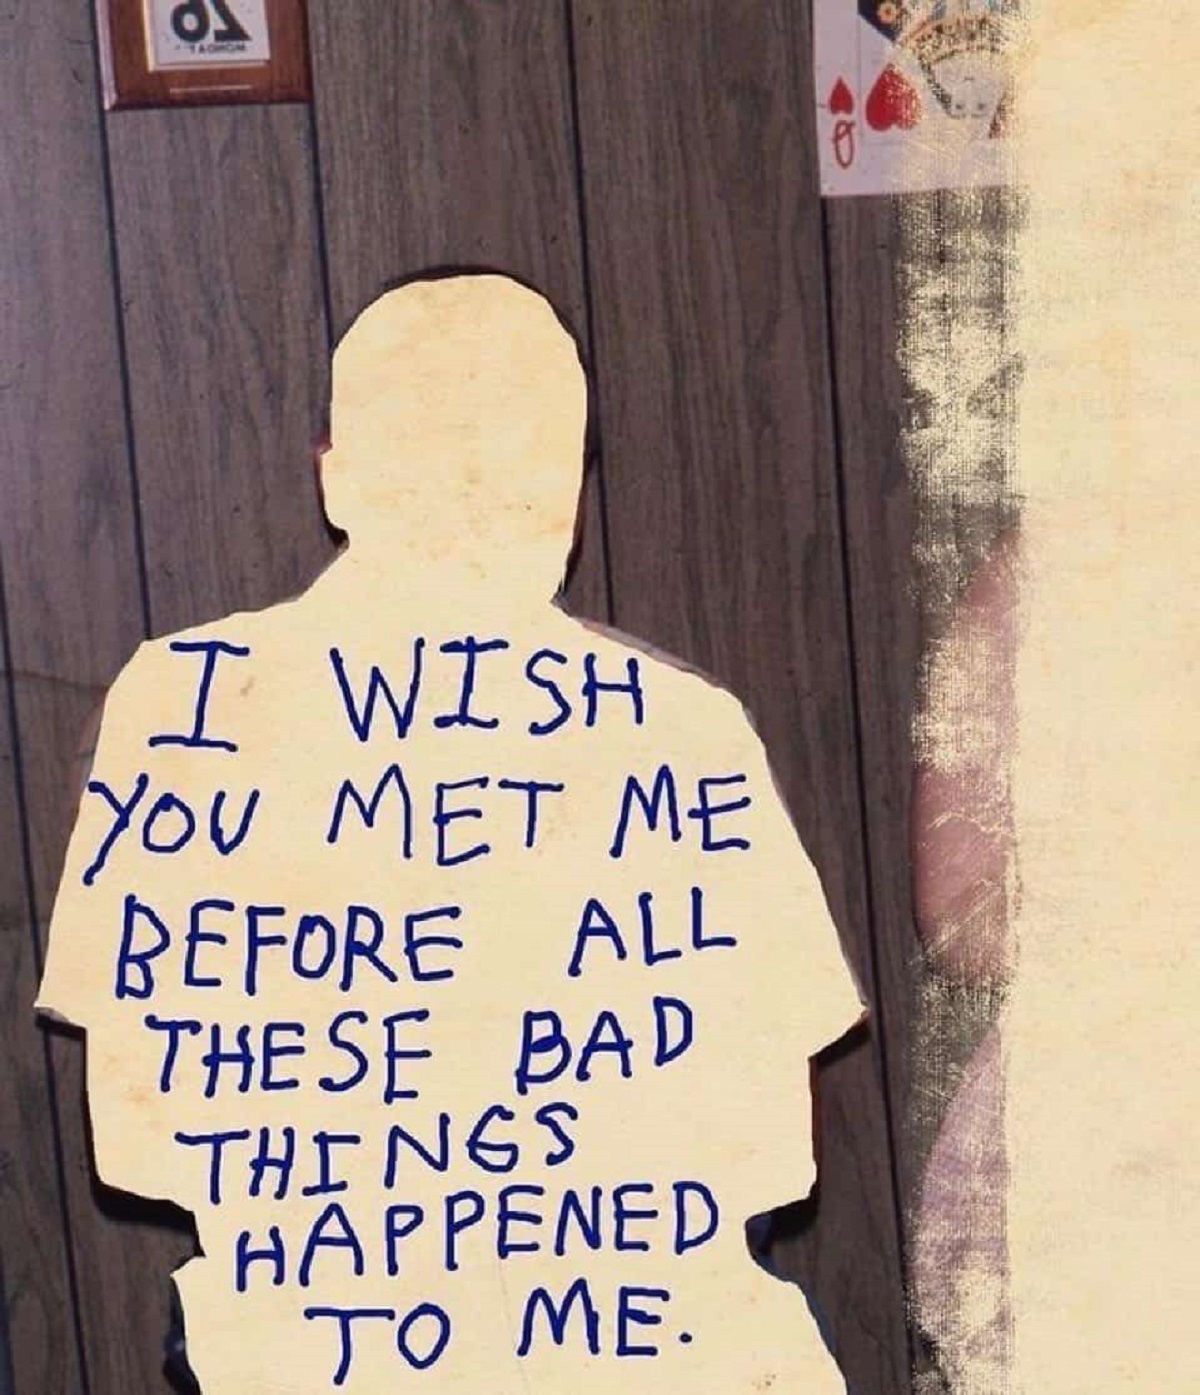 wish you met me before all these bad things happened to me - I Wish You Met Me Before All These Bad Things Happened To Me.